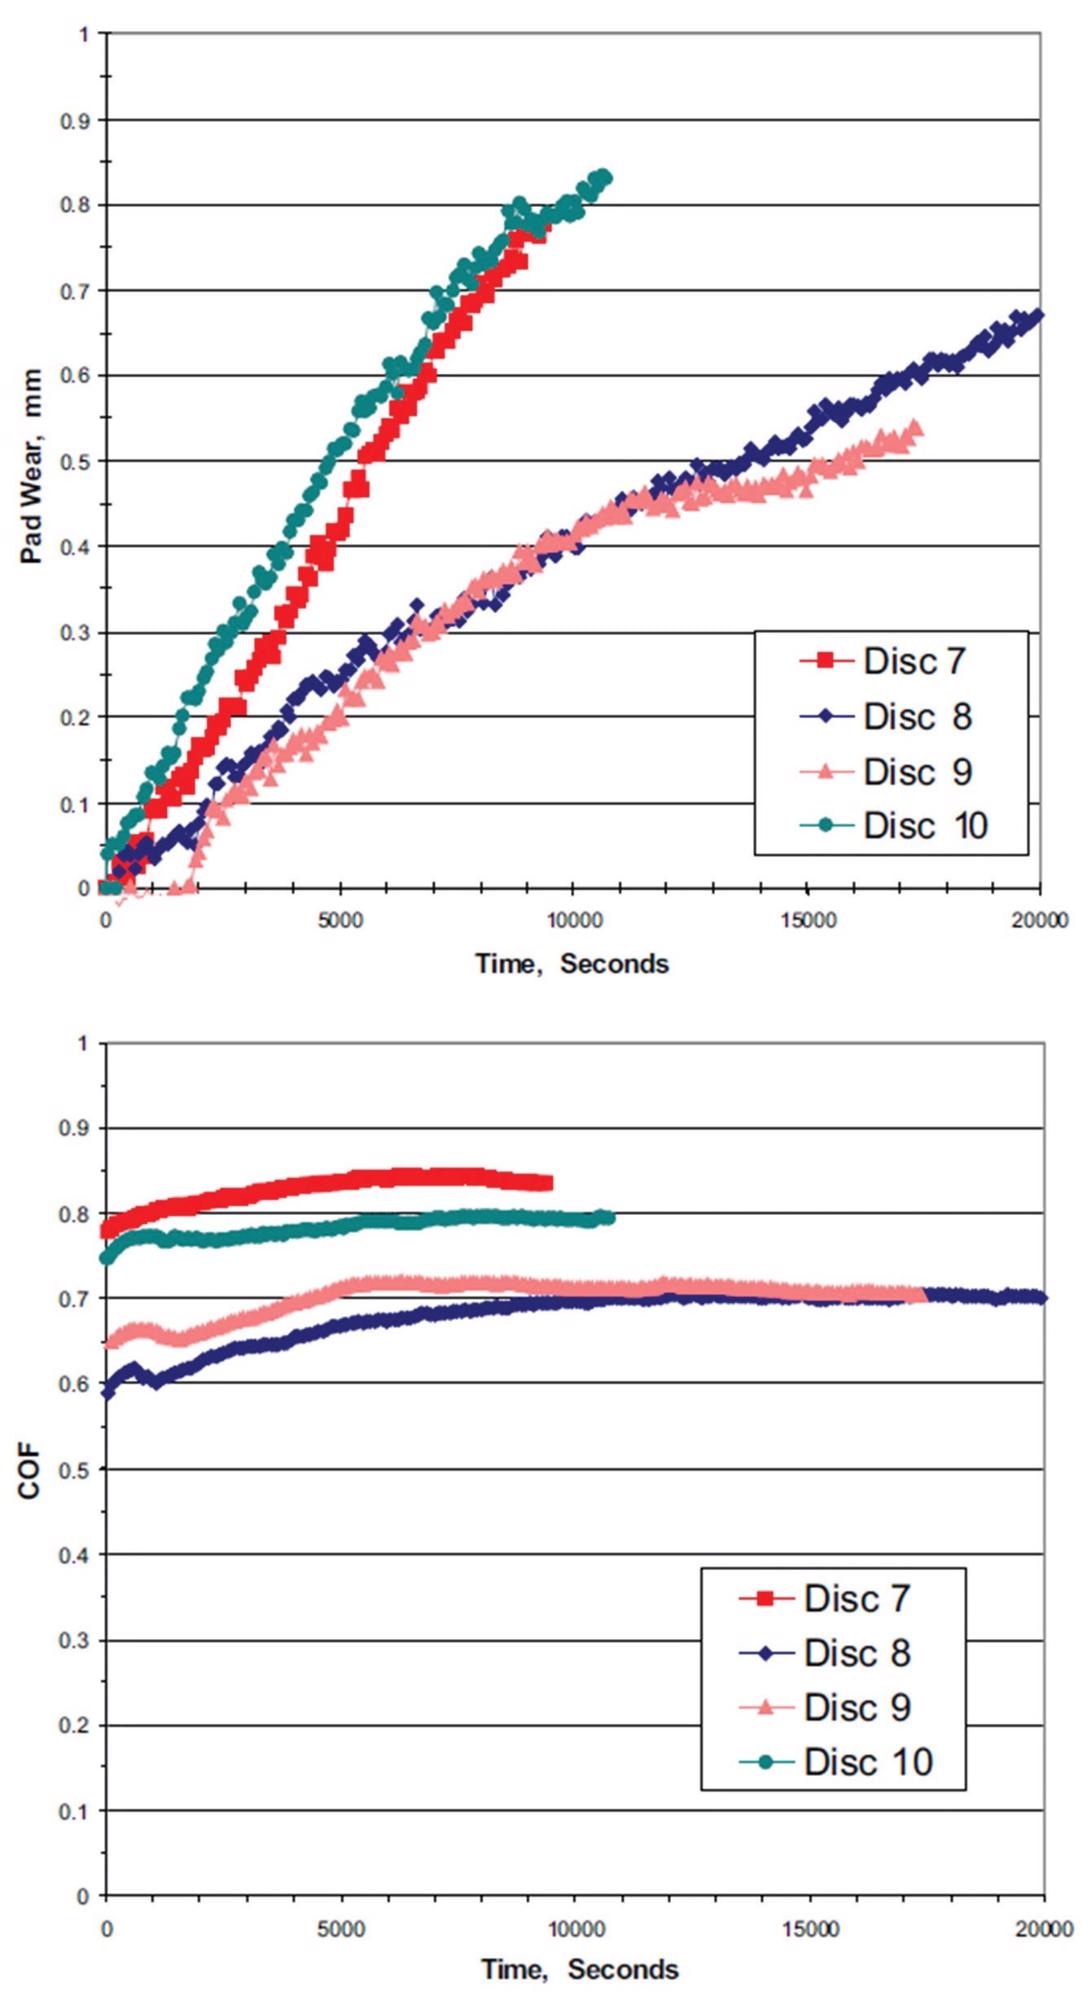 The top graph shows pad wear rate in millimeters. Conditioning discs 8 and 9 show lower wear. The bottom graph shows friction variation with time, and conditioning discs 8 and 9 also showed longer stabilization time (in terms of COF).